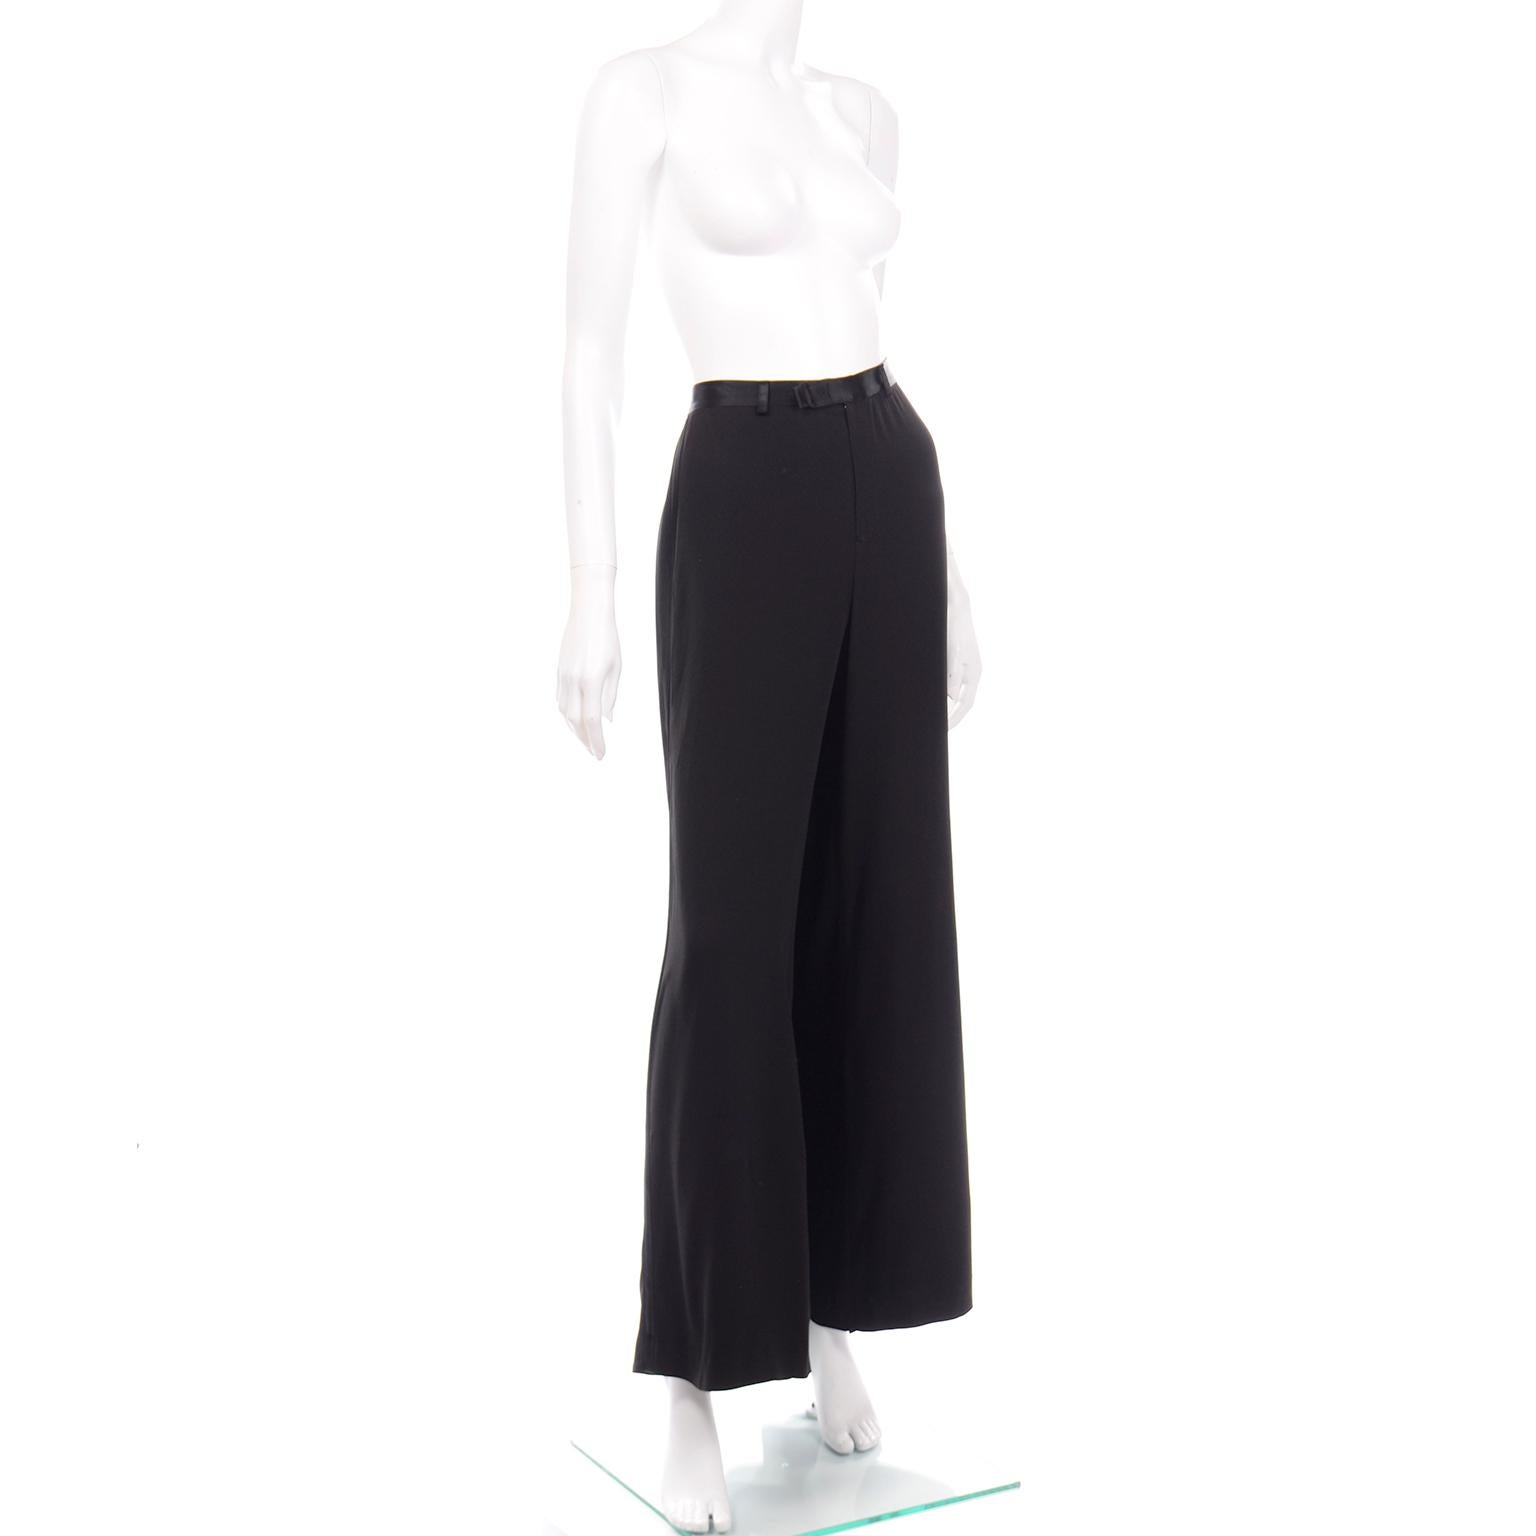 This gorgeous Jean Paul Gaultier Classiques long black evening skirt has a train in back and the front is split to reveal wide leg trousers attached underneath. This black crepe skirt has a satin Waistband with belt loops, and closes with a front